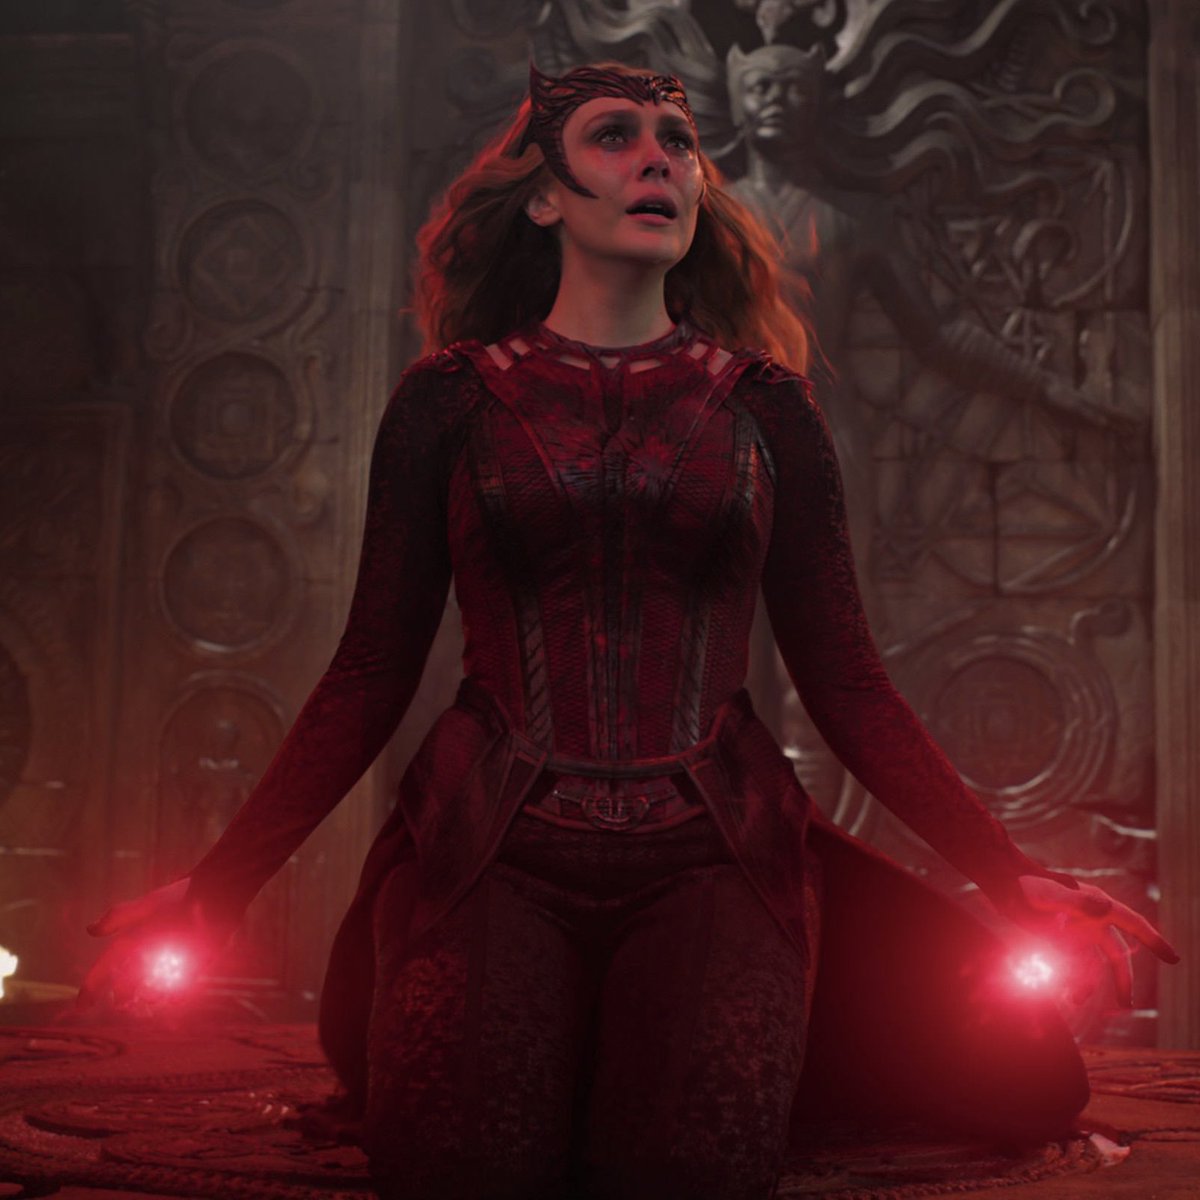 THE SCARLET WITCH WILL RETURN